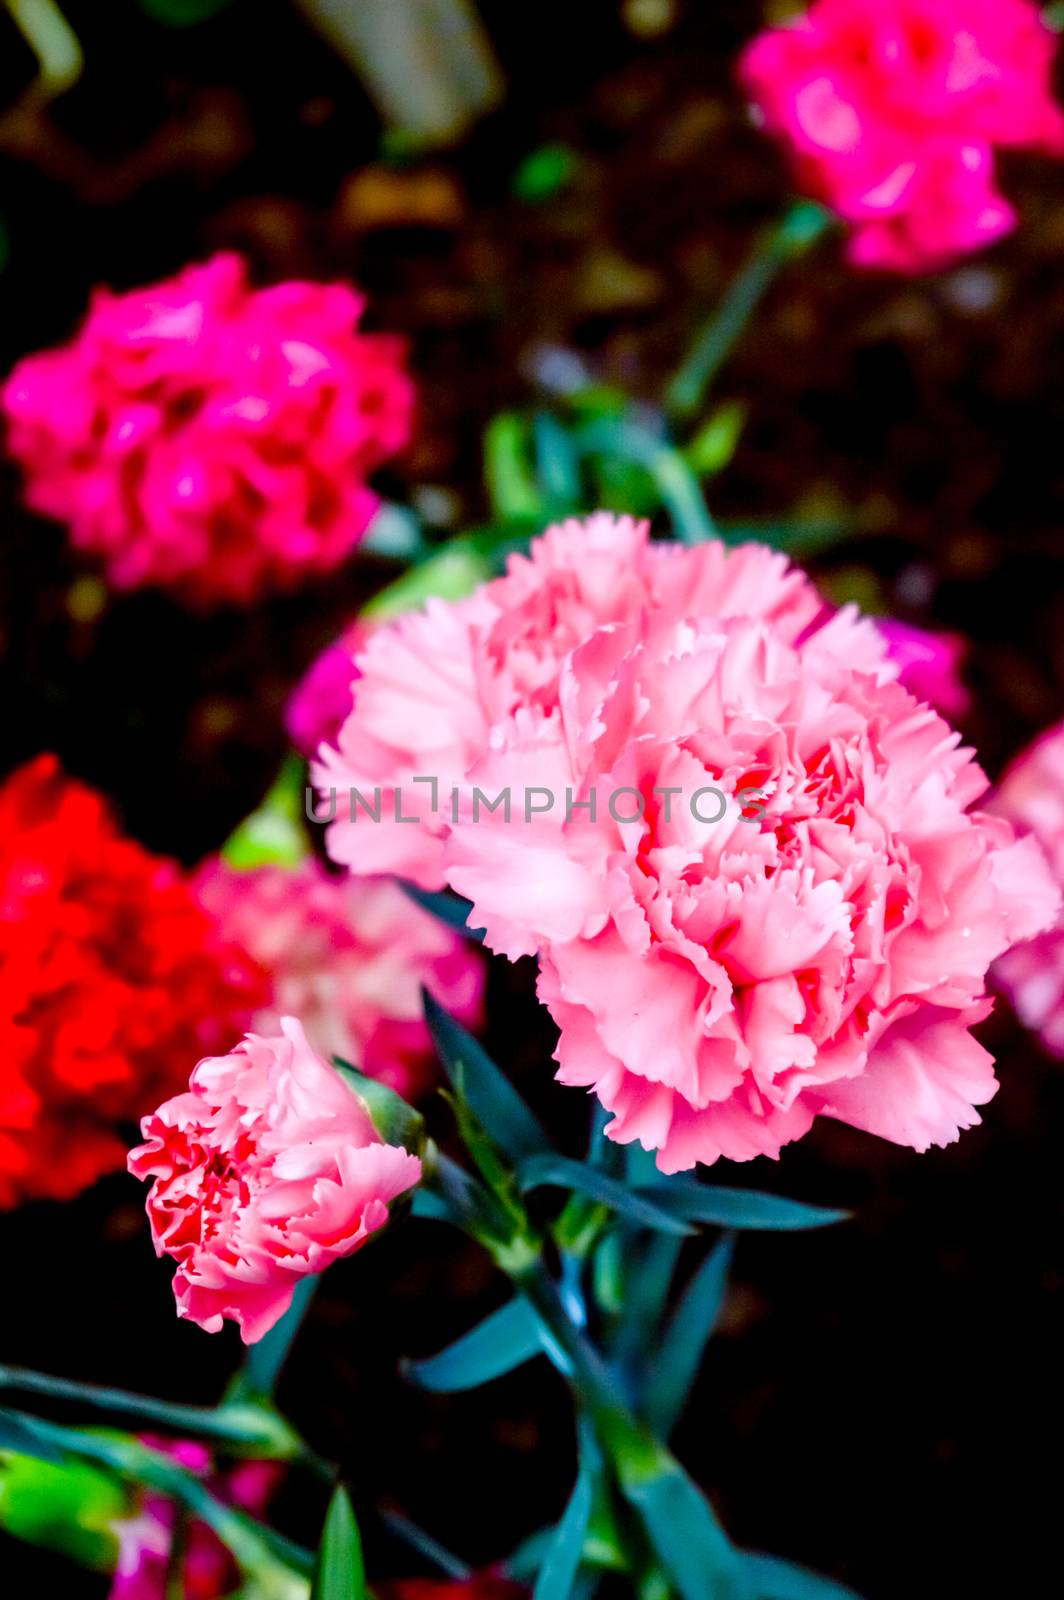 Dianthus caryophyllus, the carnation or clove pink is a species of Dianthus. It is an herbaceous perennial plant. The carnation is national flower of Spain, Monaco, and Slovenia.